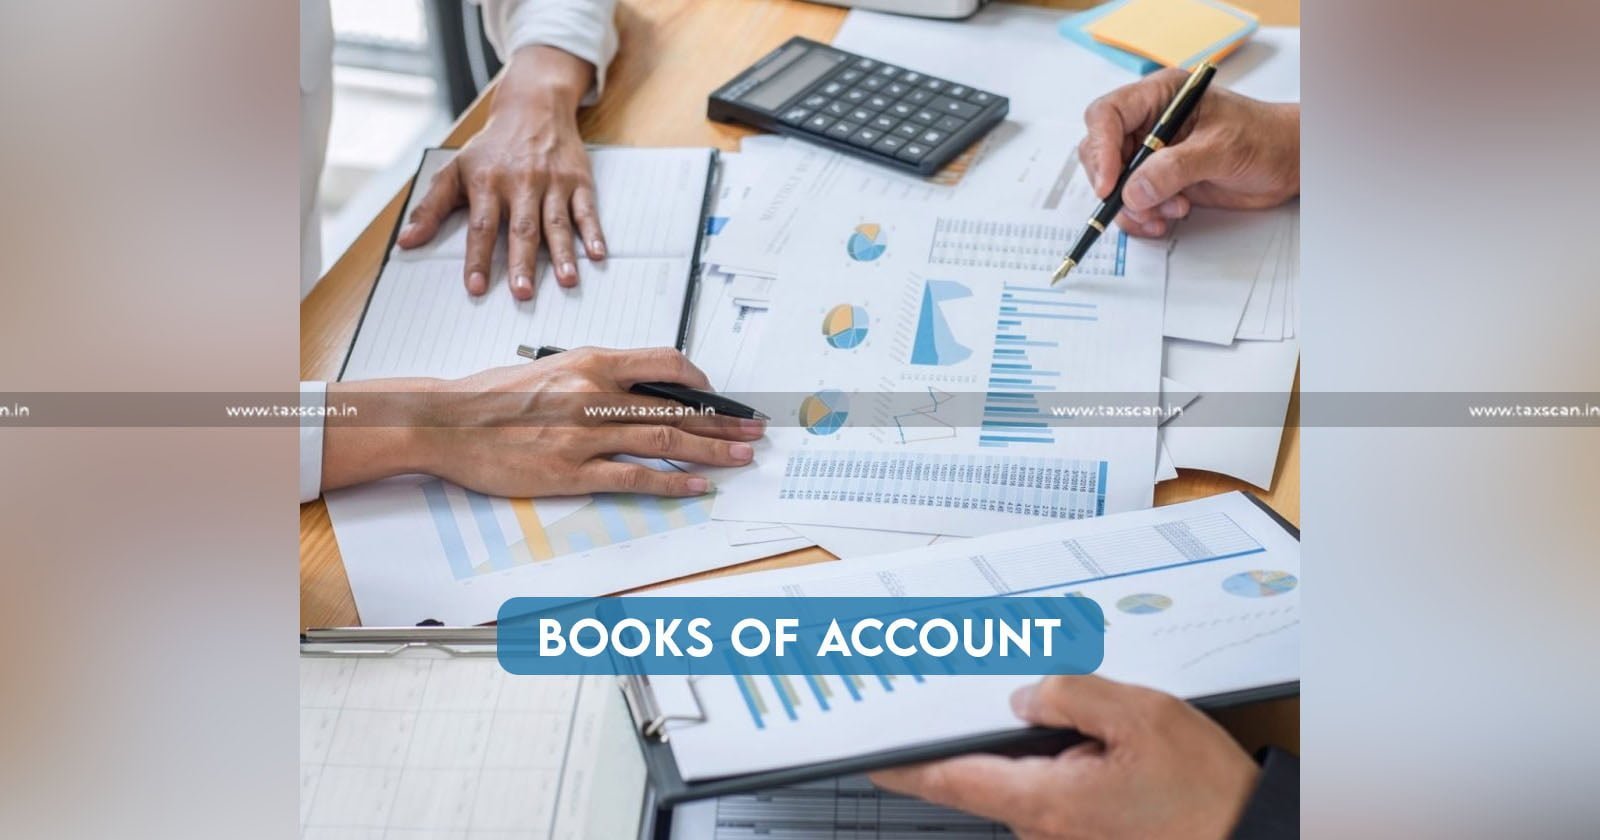 Cenvat Credit Available on Books of Accounts - Transfer of Ownership - Books of Accounts -Cenvat Credit - CCR Applicable - CCR - CESTAT - taxscan